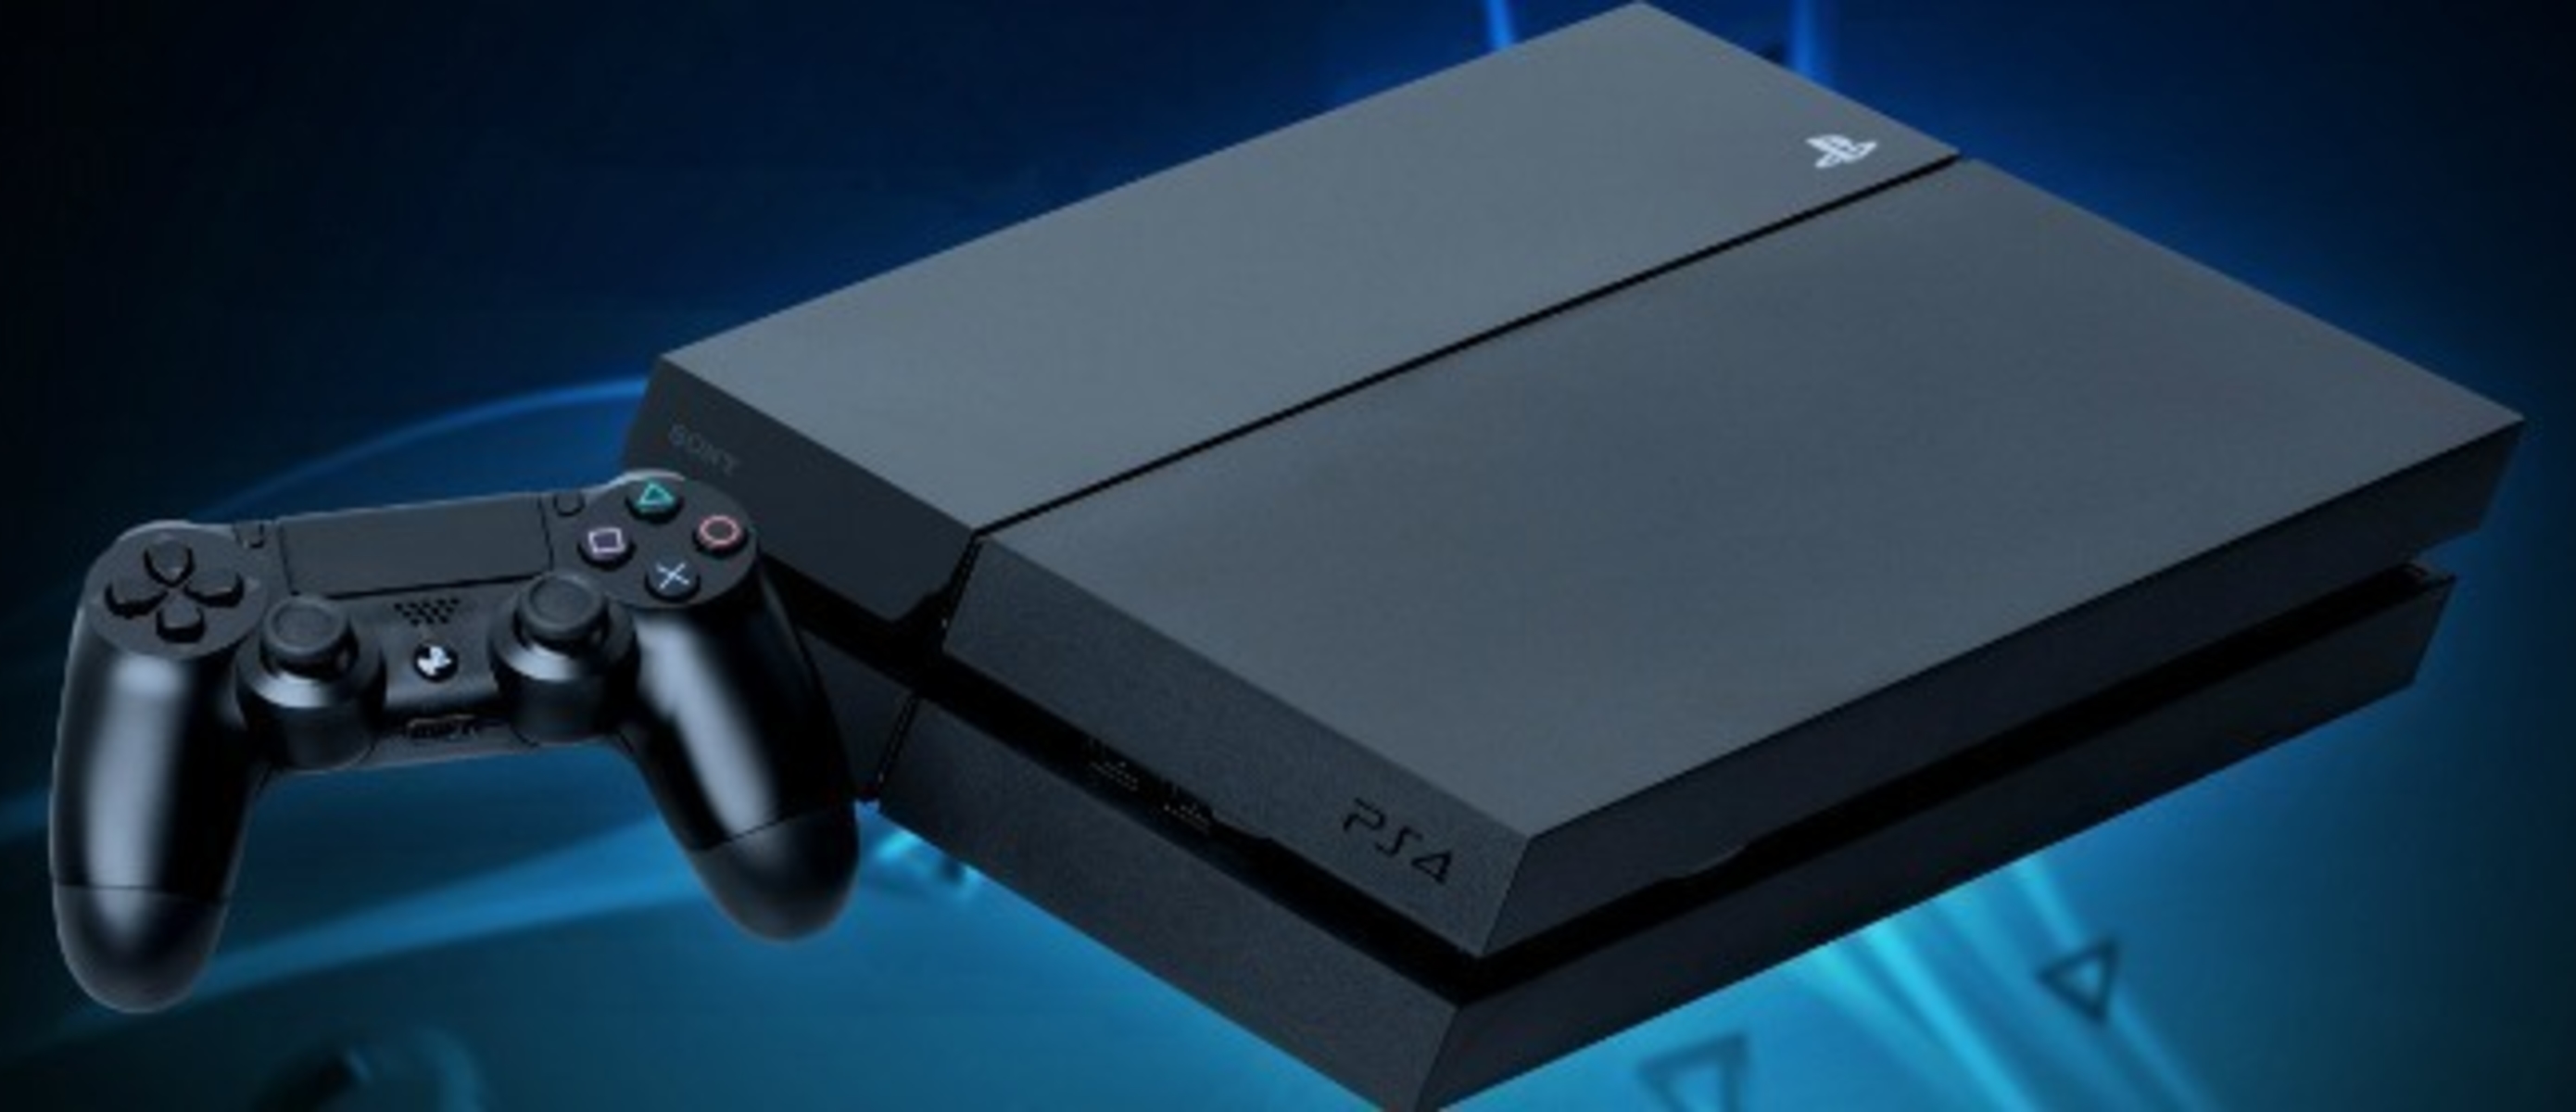 Ps4 2.0. Сони плейстейшен ps4. Sony PLAYSTATION 4 ps4. Приставки ps2 / ps3 / ps4 / Xbox / Nintendo. Console PLAYSTATION ps4.